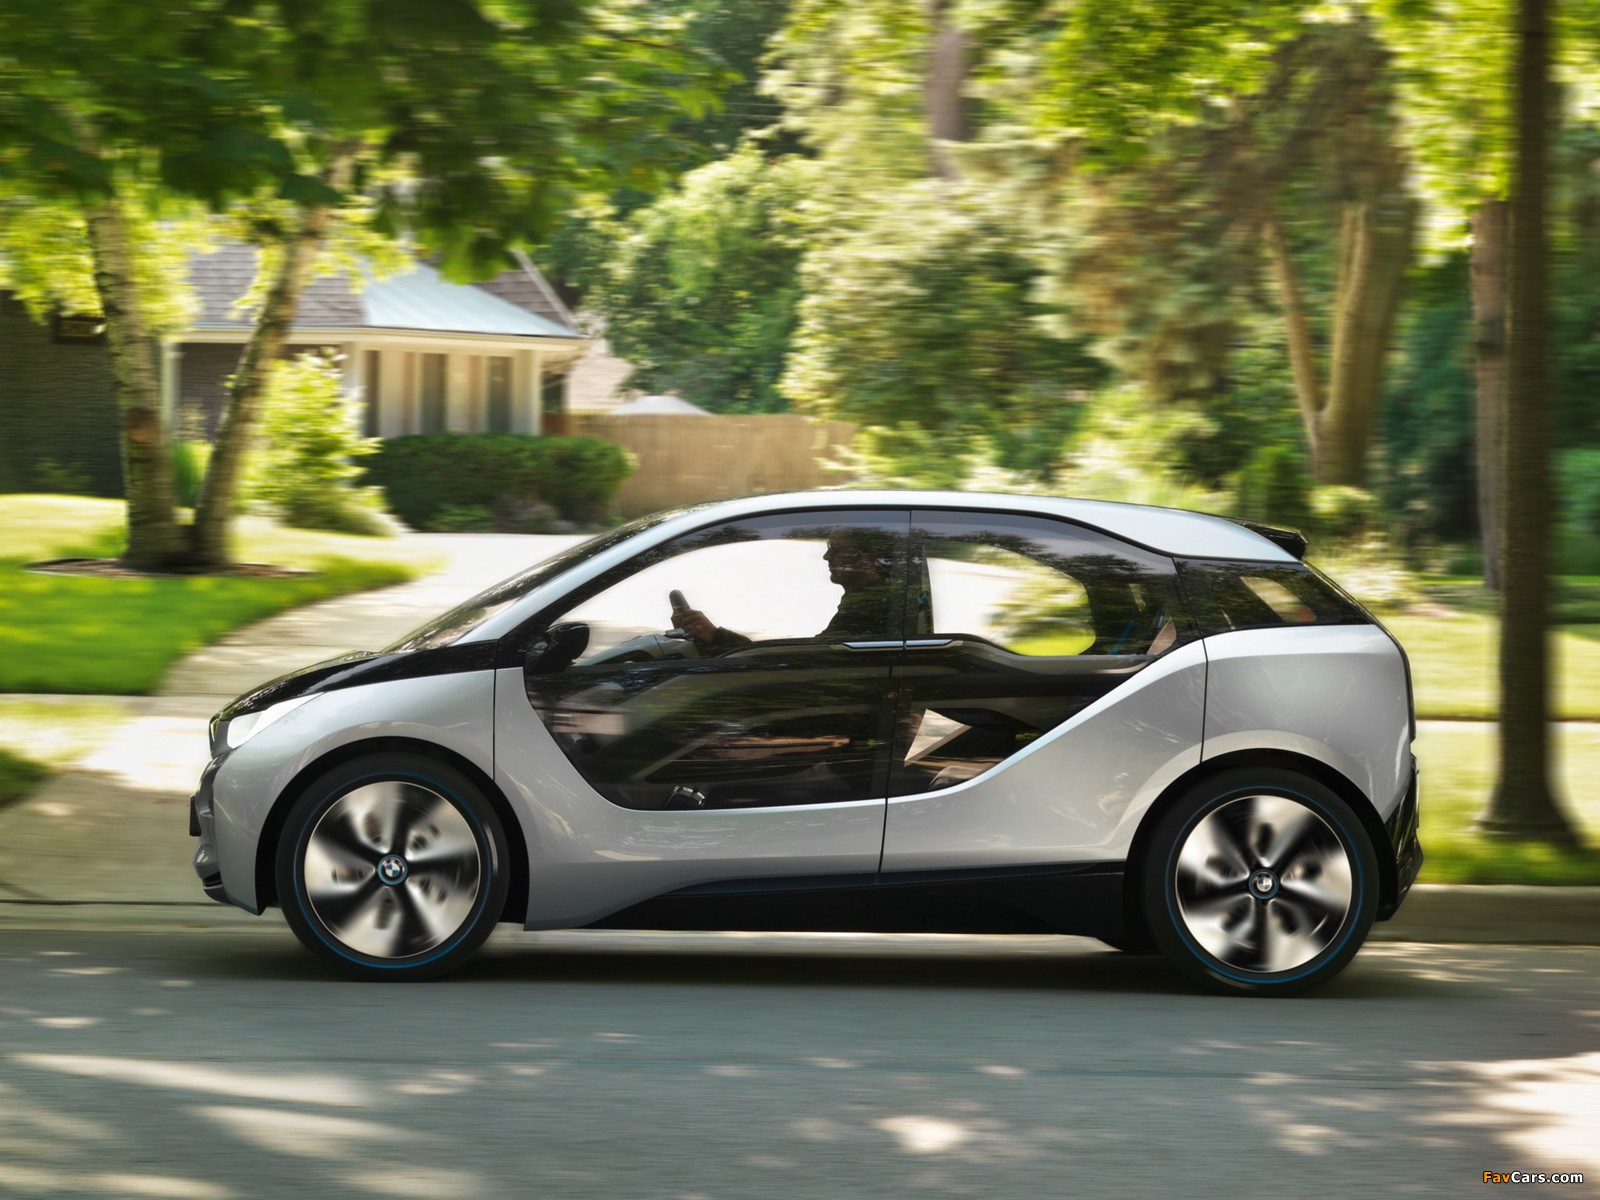 BMW i3 Concept 2011 pictures (1600 x 1200)